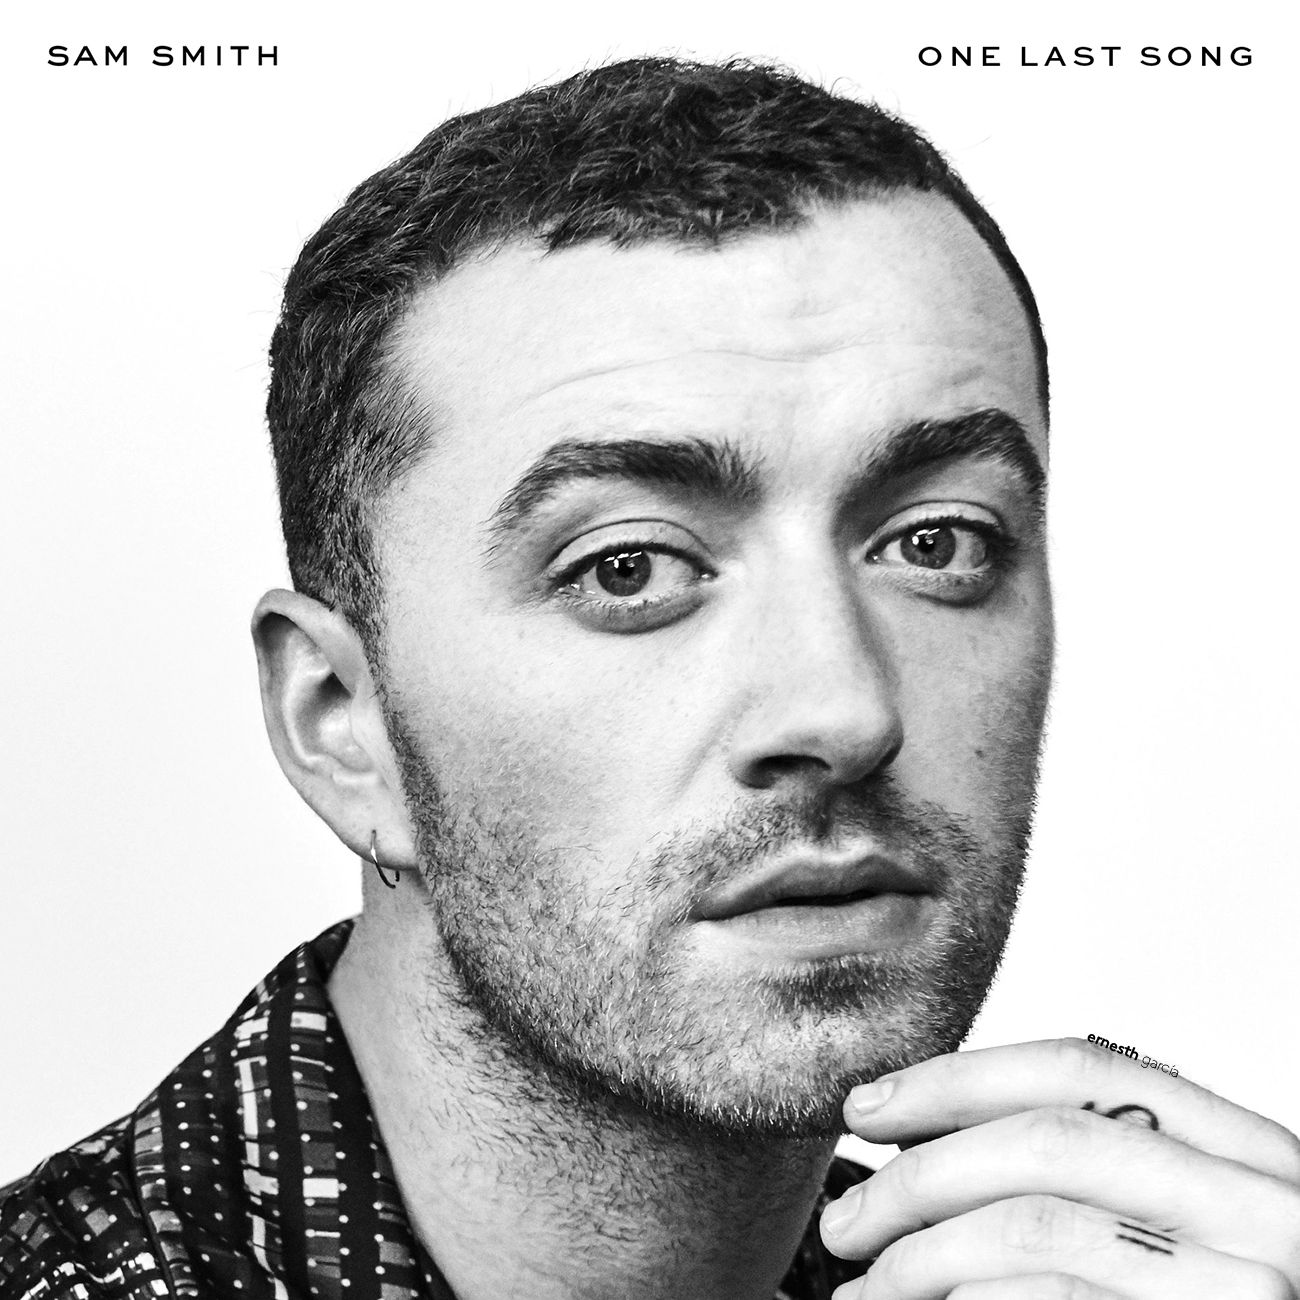 sam smith in the lonely hour album download free